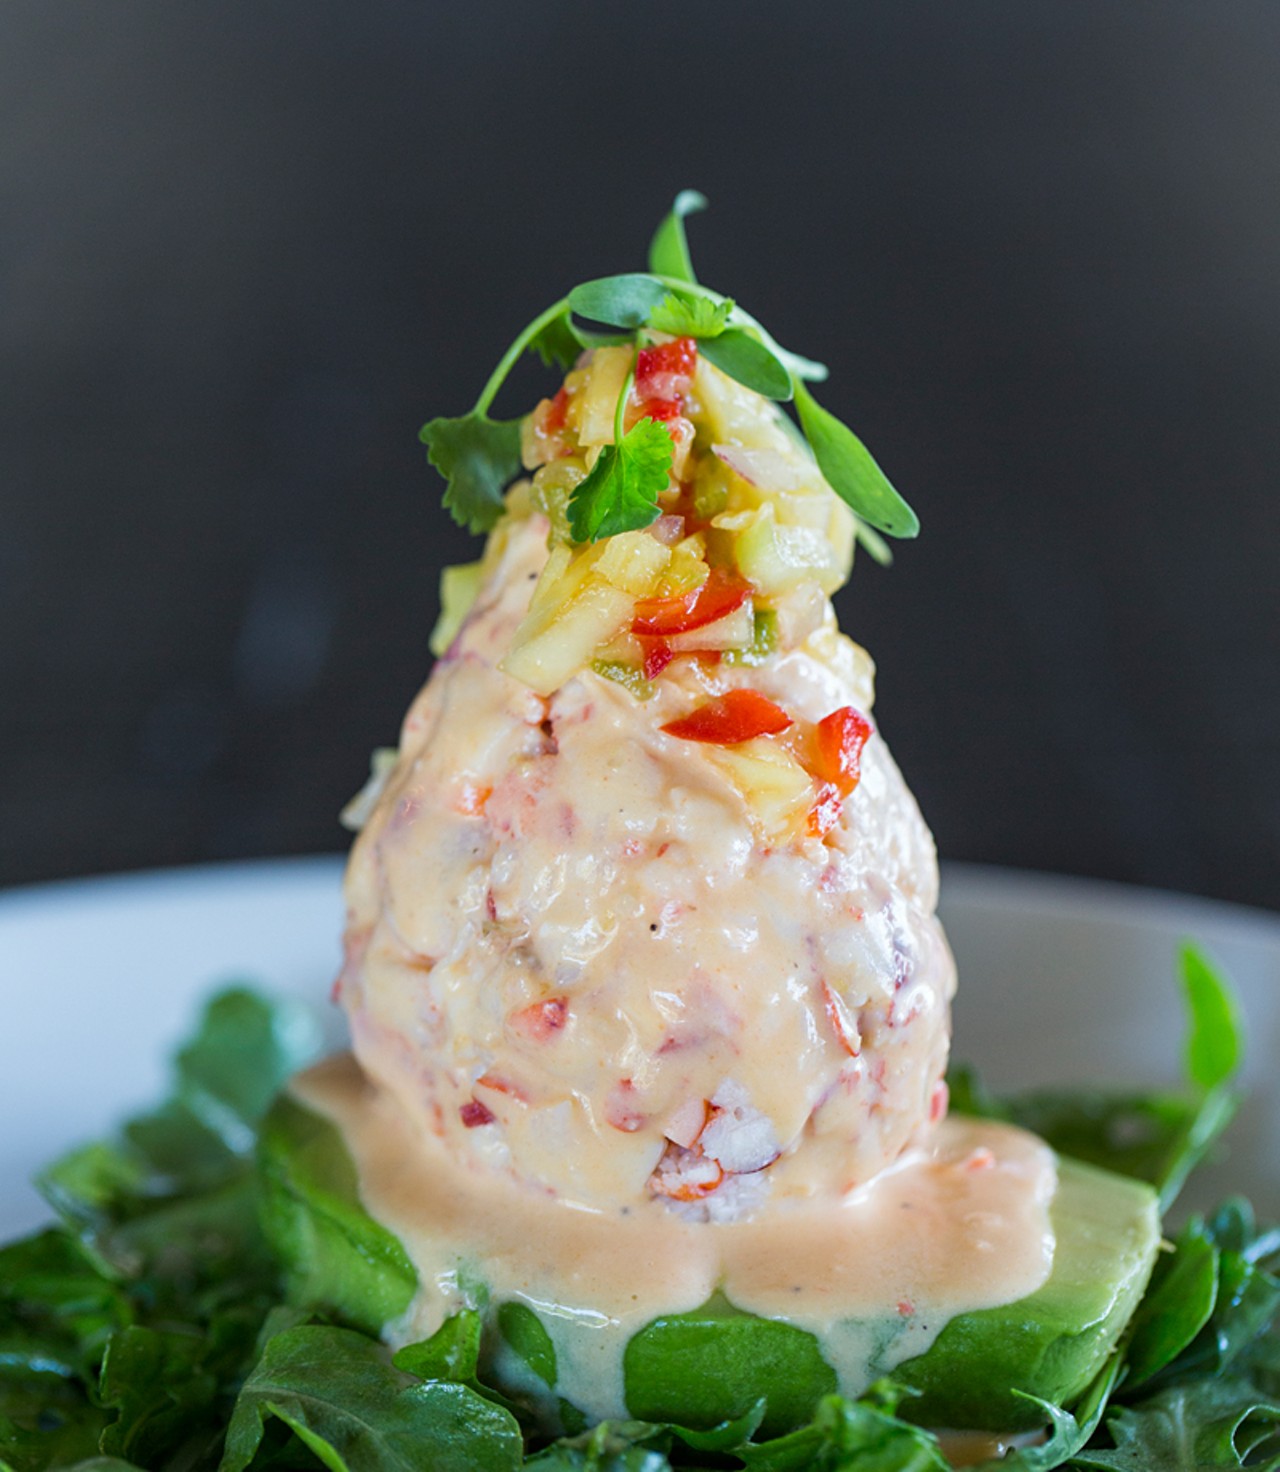 Lobster avocado with mango salsa and chile beurre blanc is an offering from the lunch menu.